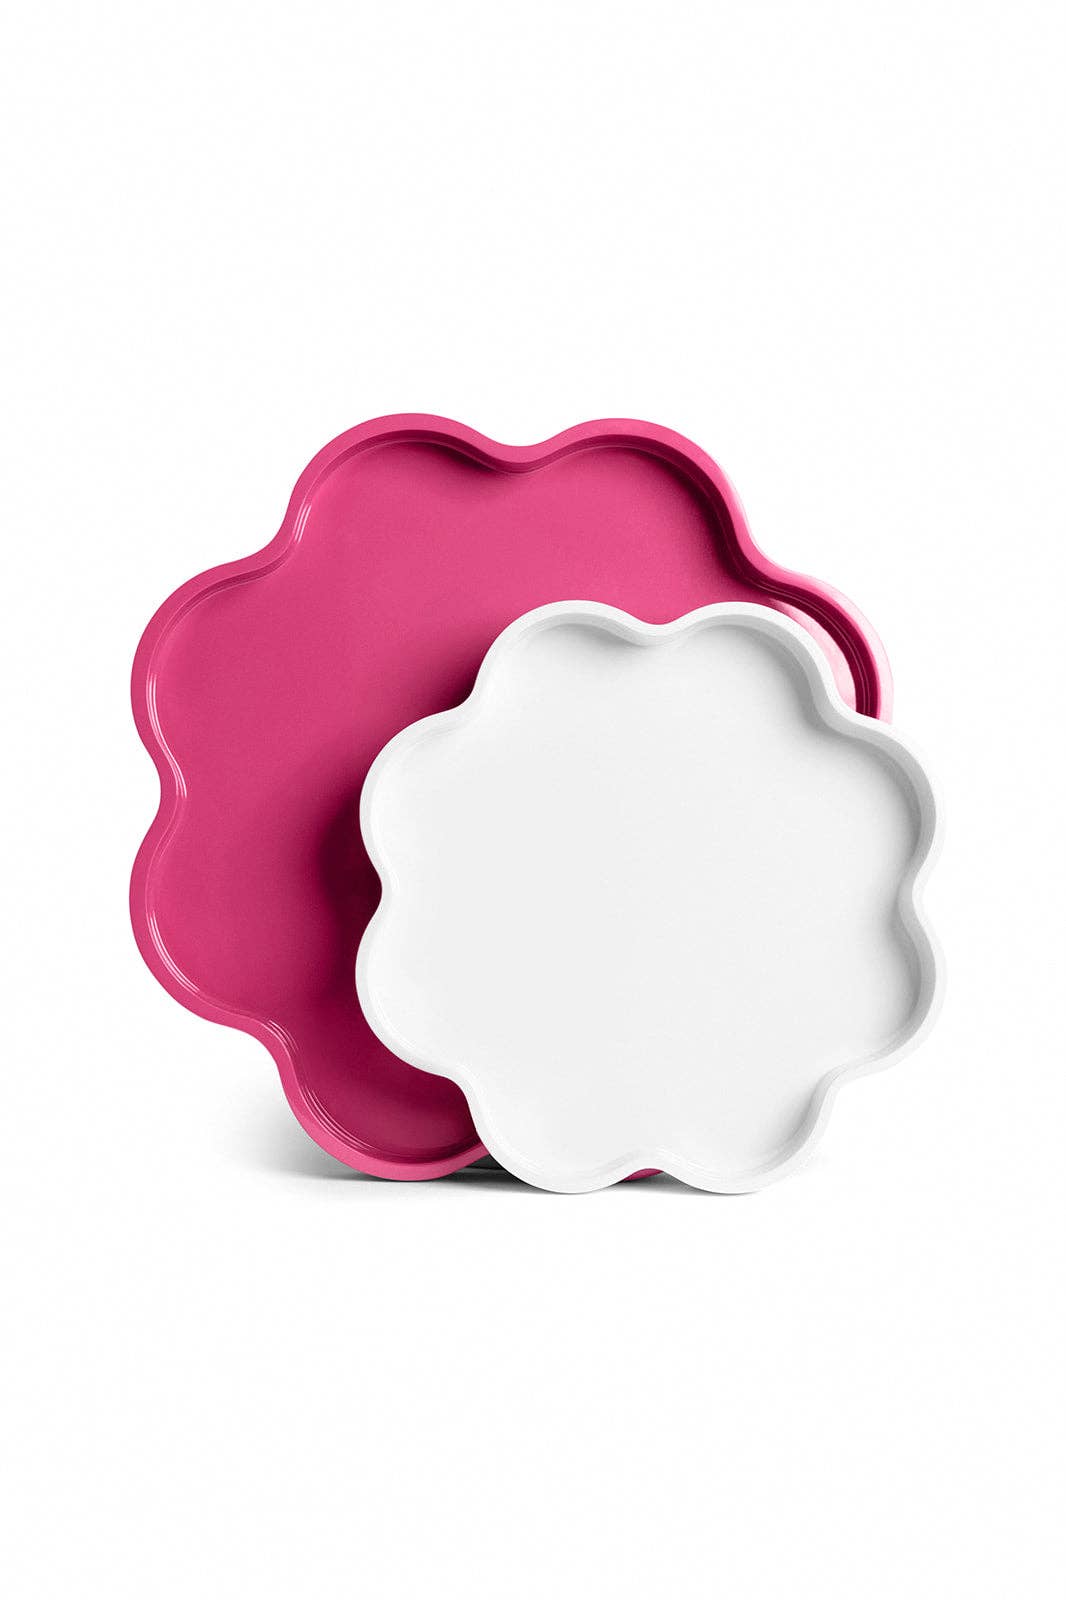 Lacquered "Bloom" Tray by Pastel Proper: Medium-Cloud